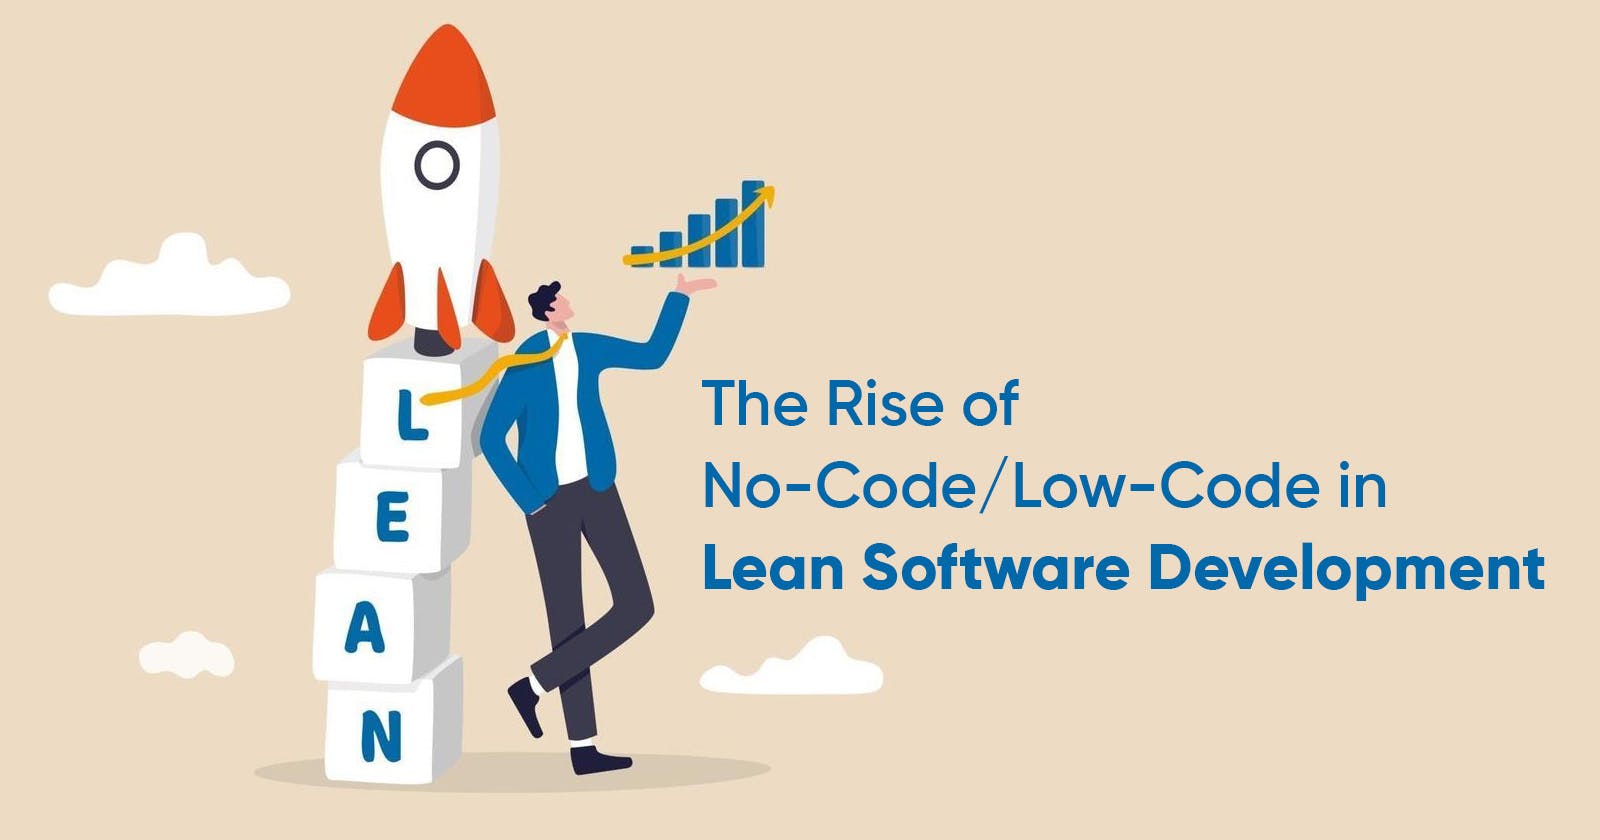 The Rise of No-Code/Low-Code in Lean Software Development